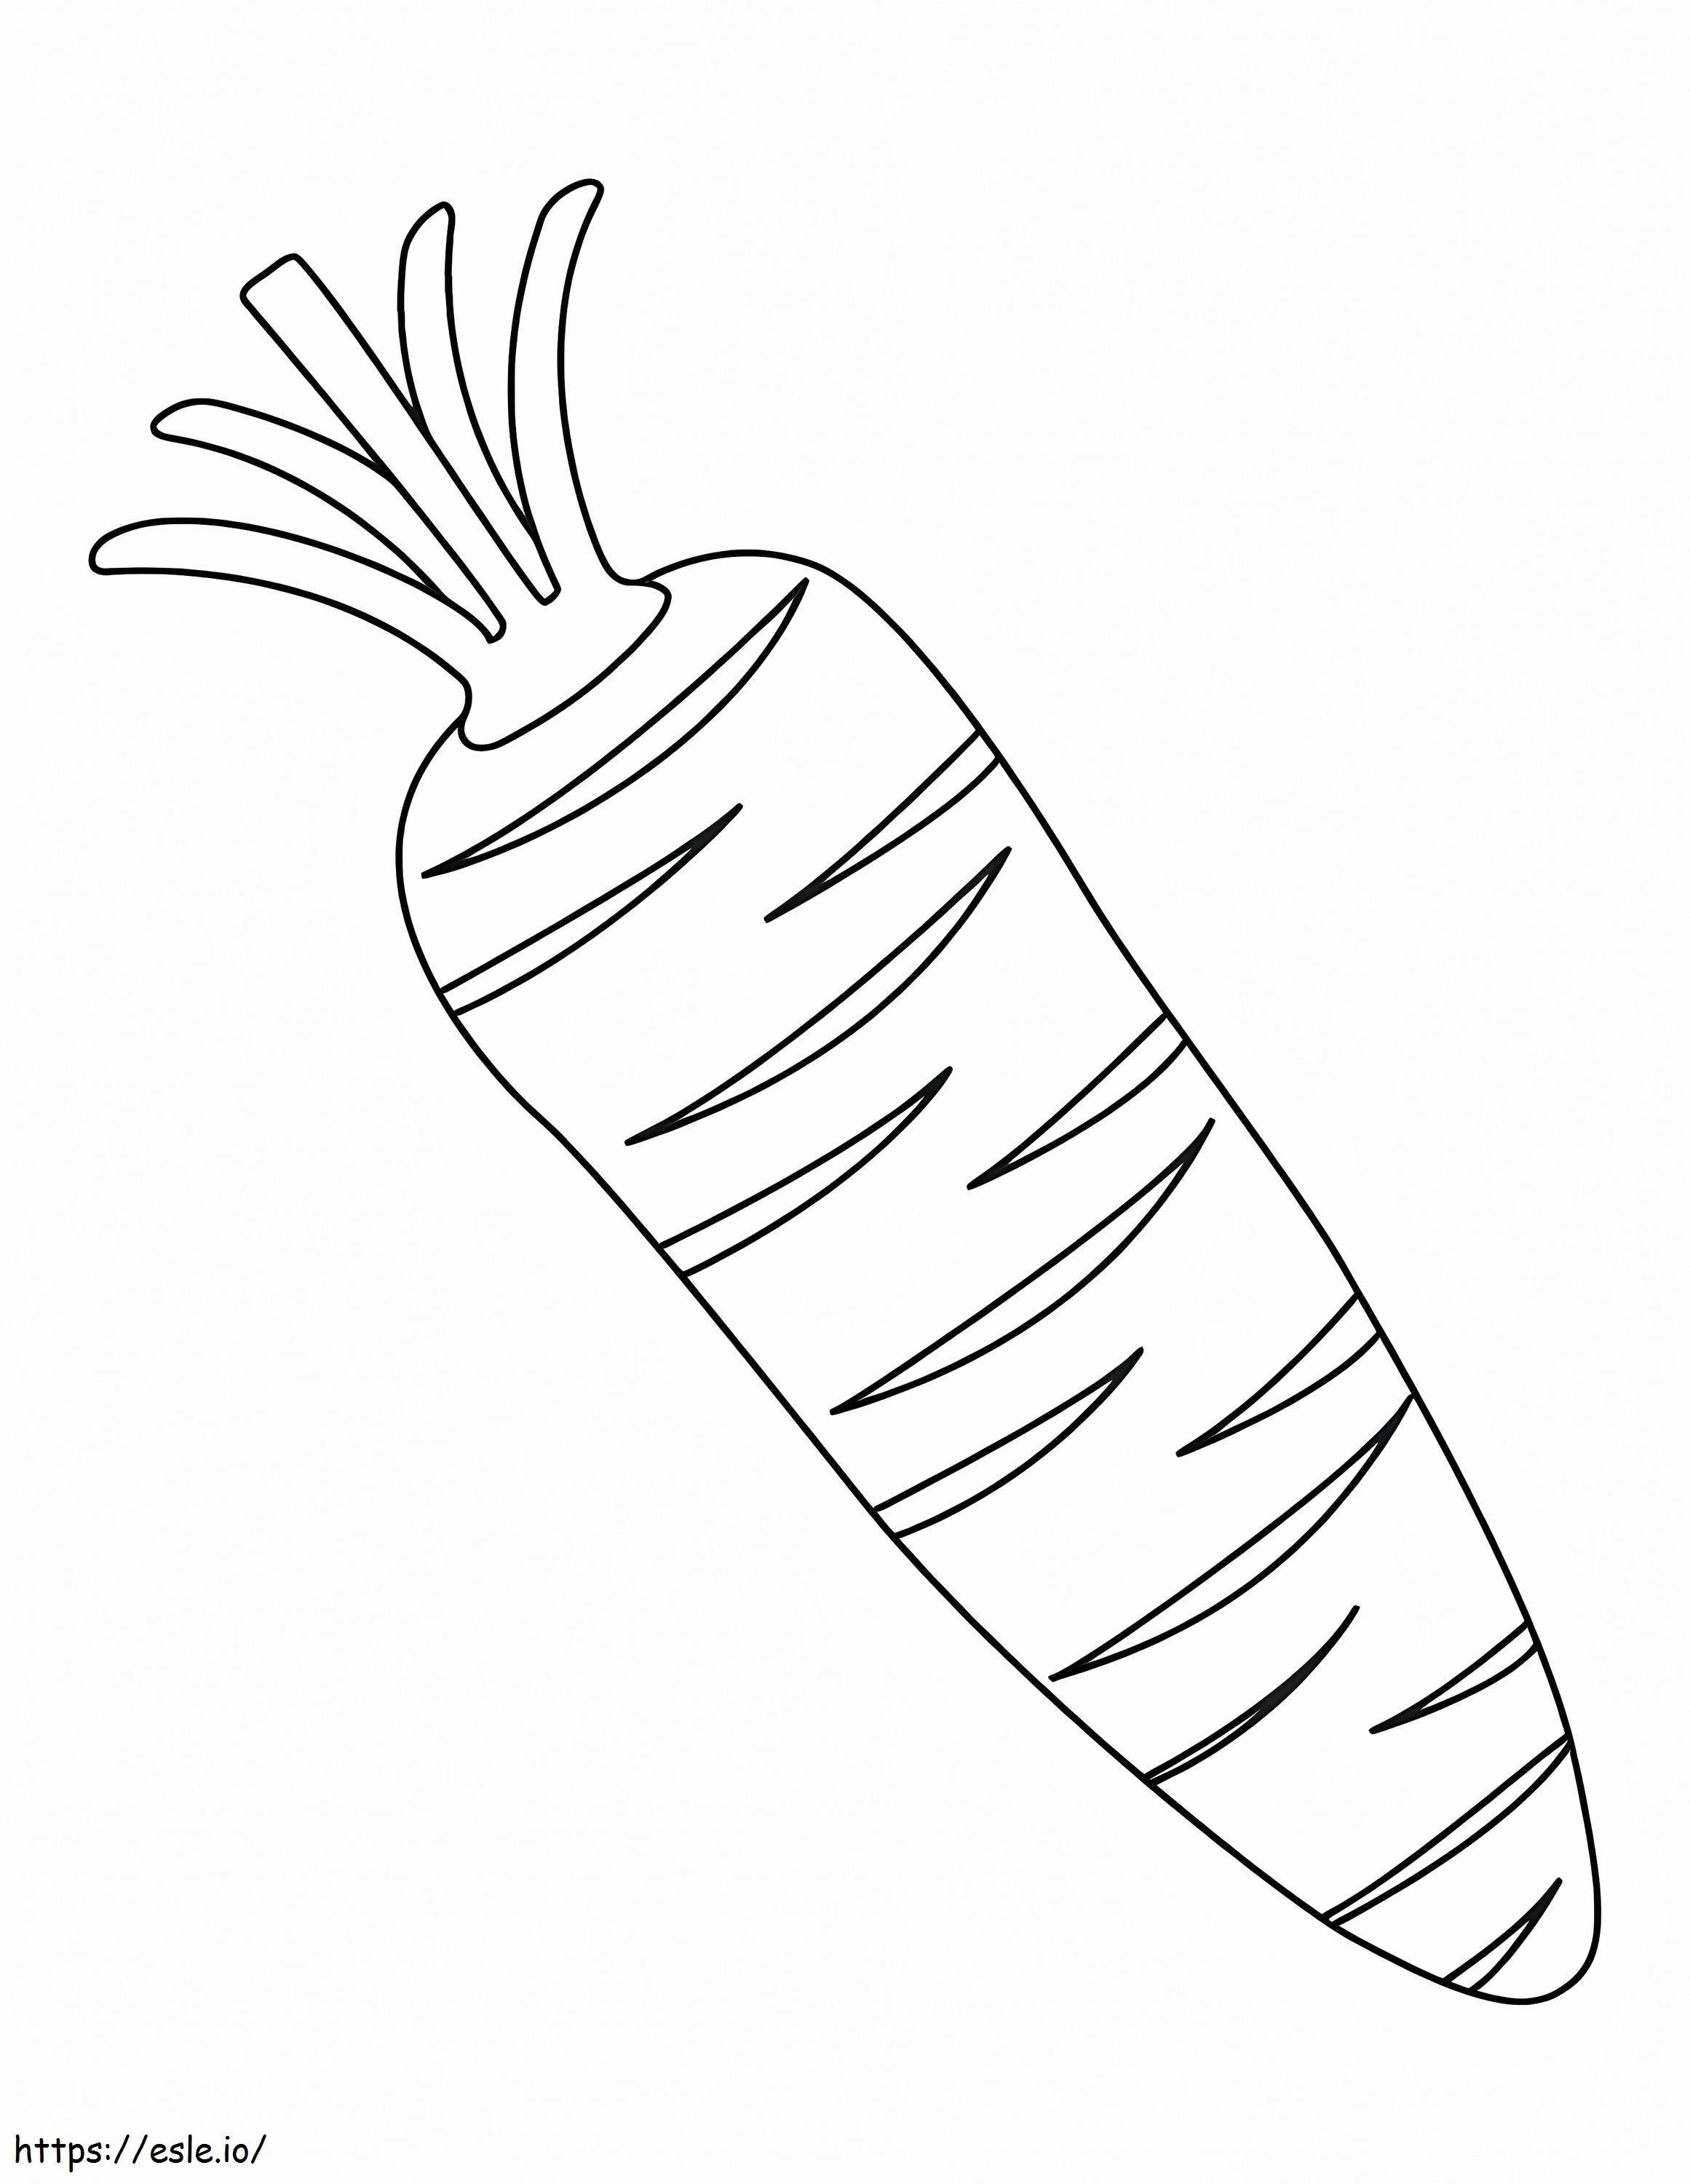 Simple Carrot coloring page